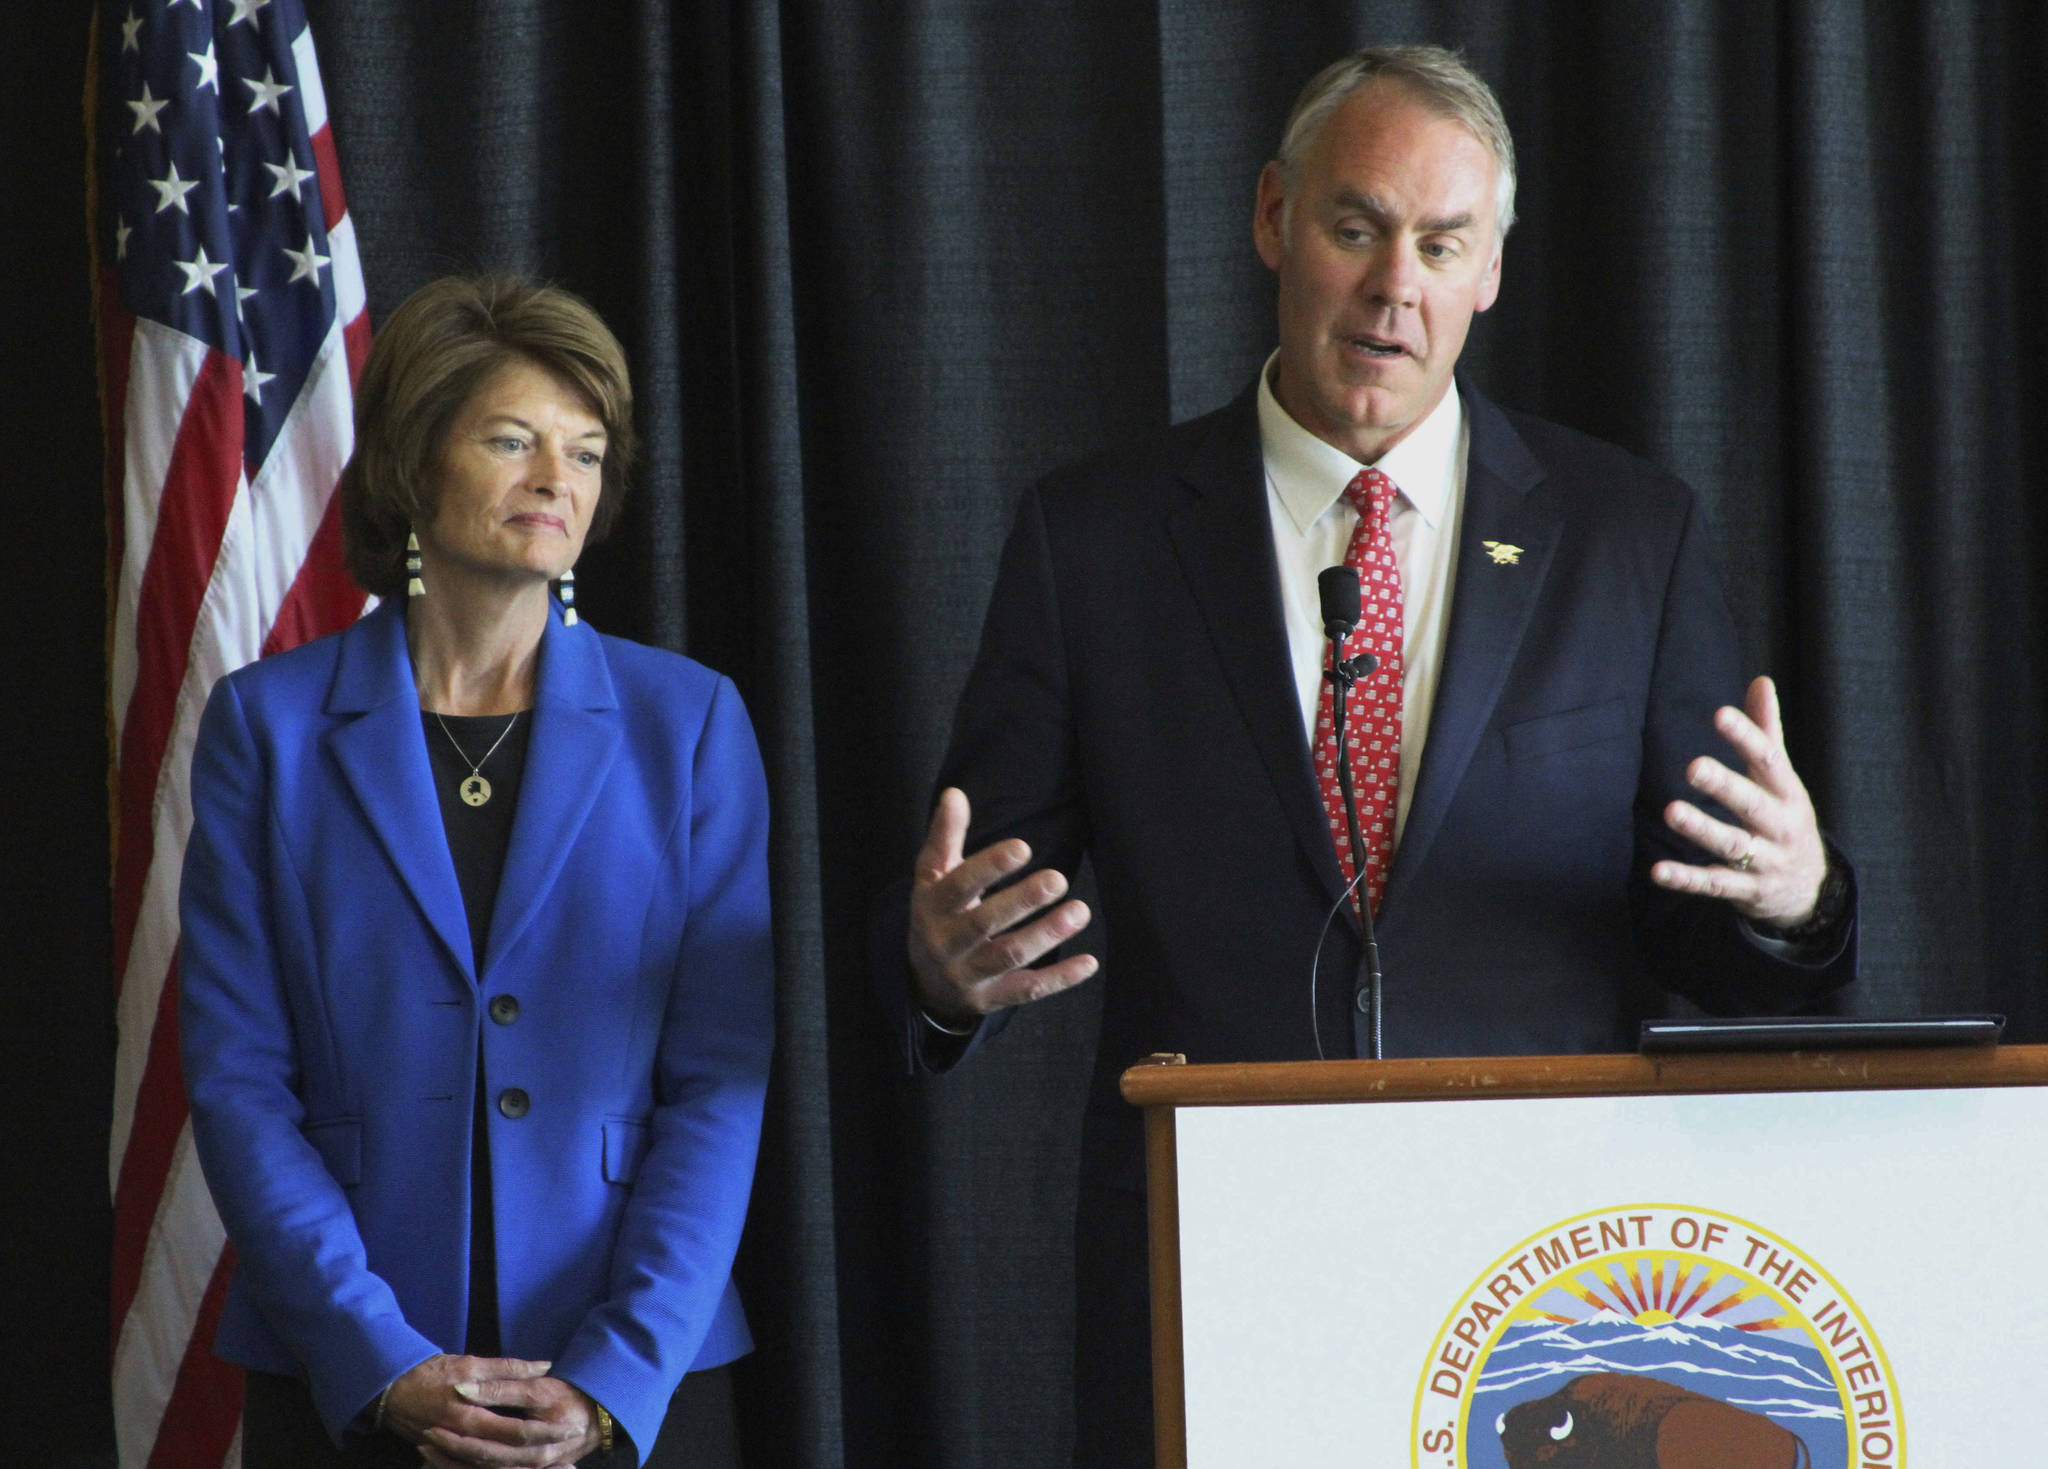 In this May 31 photo, Interior Secretary Ryan Zinke, right, with U.S. Sen. Lisa Murkowski, R-Alaska, speaks during a news conference in Anchorage. Zinke called Alaska’s two Republican senators, Murkowski and Dan Sullivan, to warn them of repercussions for the nation’s largest state if they failed to toe the Trump administration line on health care, according to a published report. (Mark Thiessen | The Associated Press)